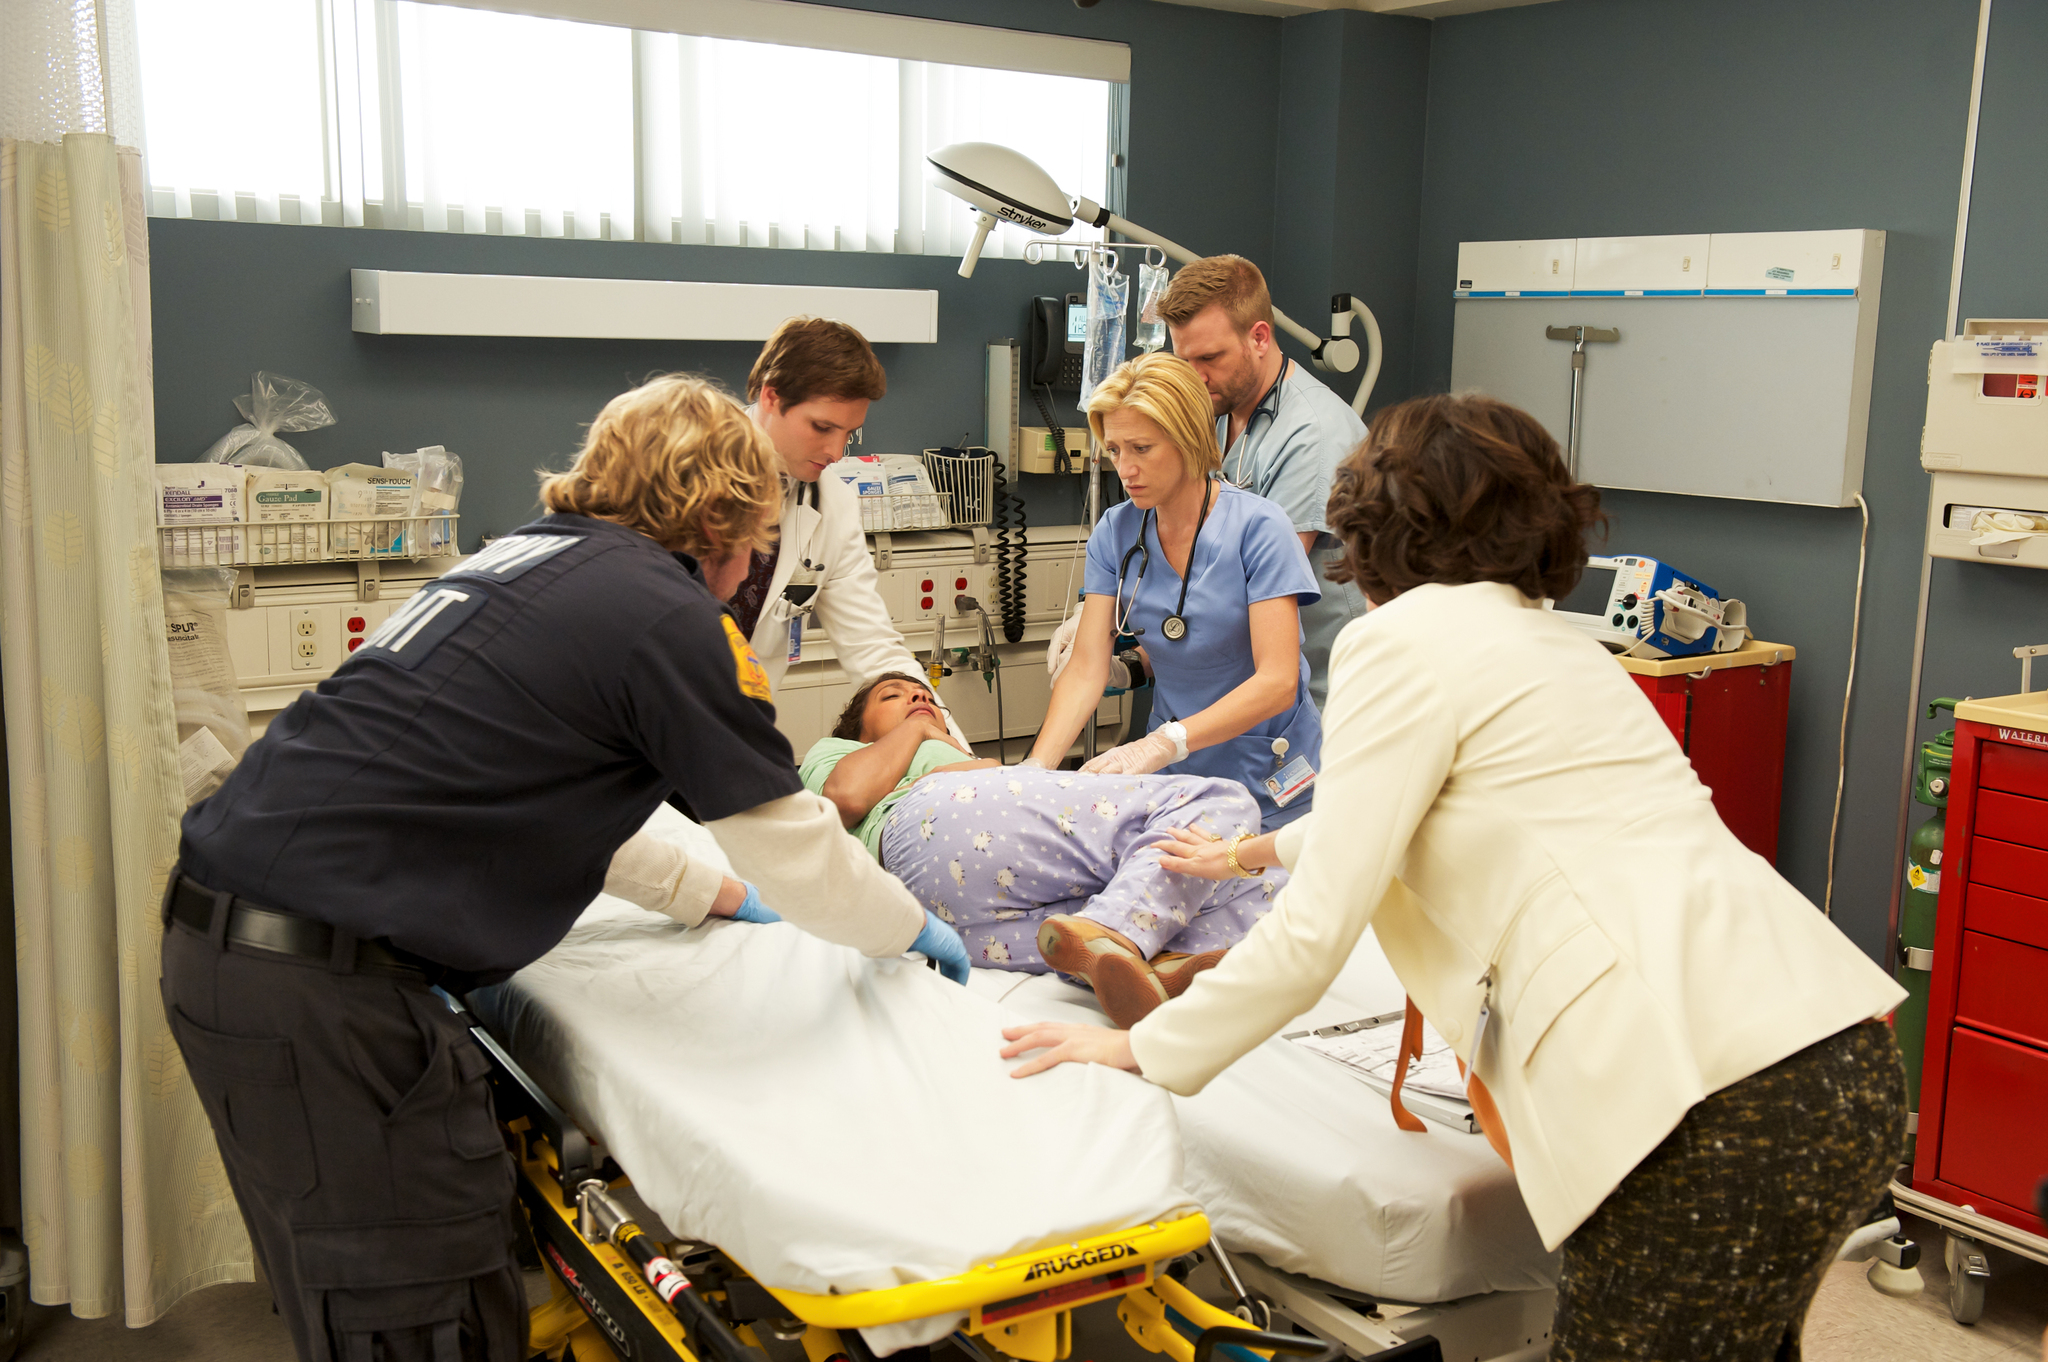 Peter Facinelli, Edie Falco, Eve Best, Lenny Jacobson and Stephen Wallem in Nurse Jackie (2009)